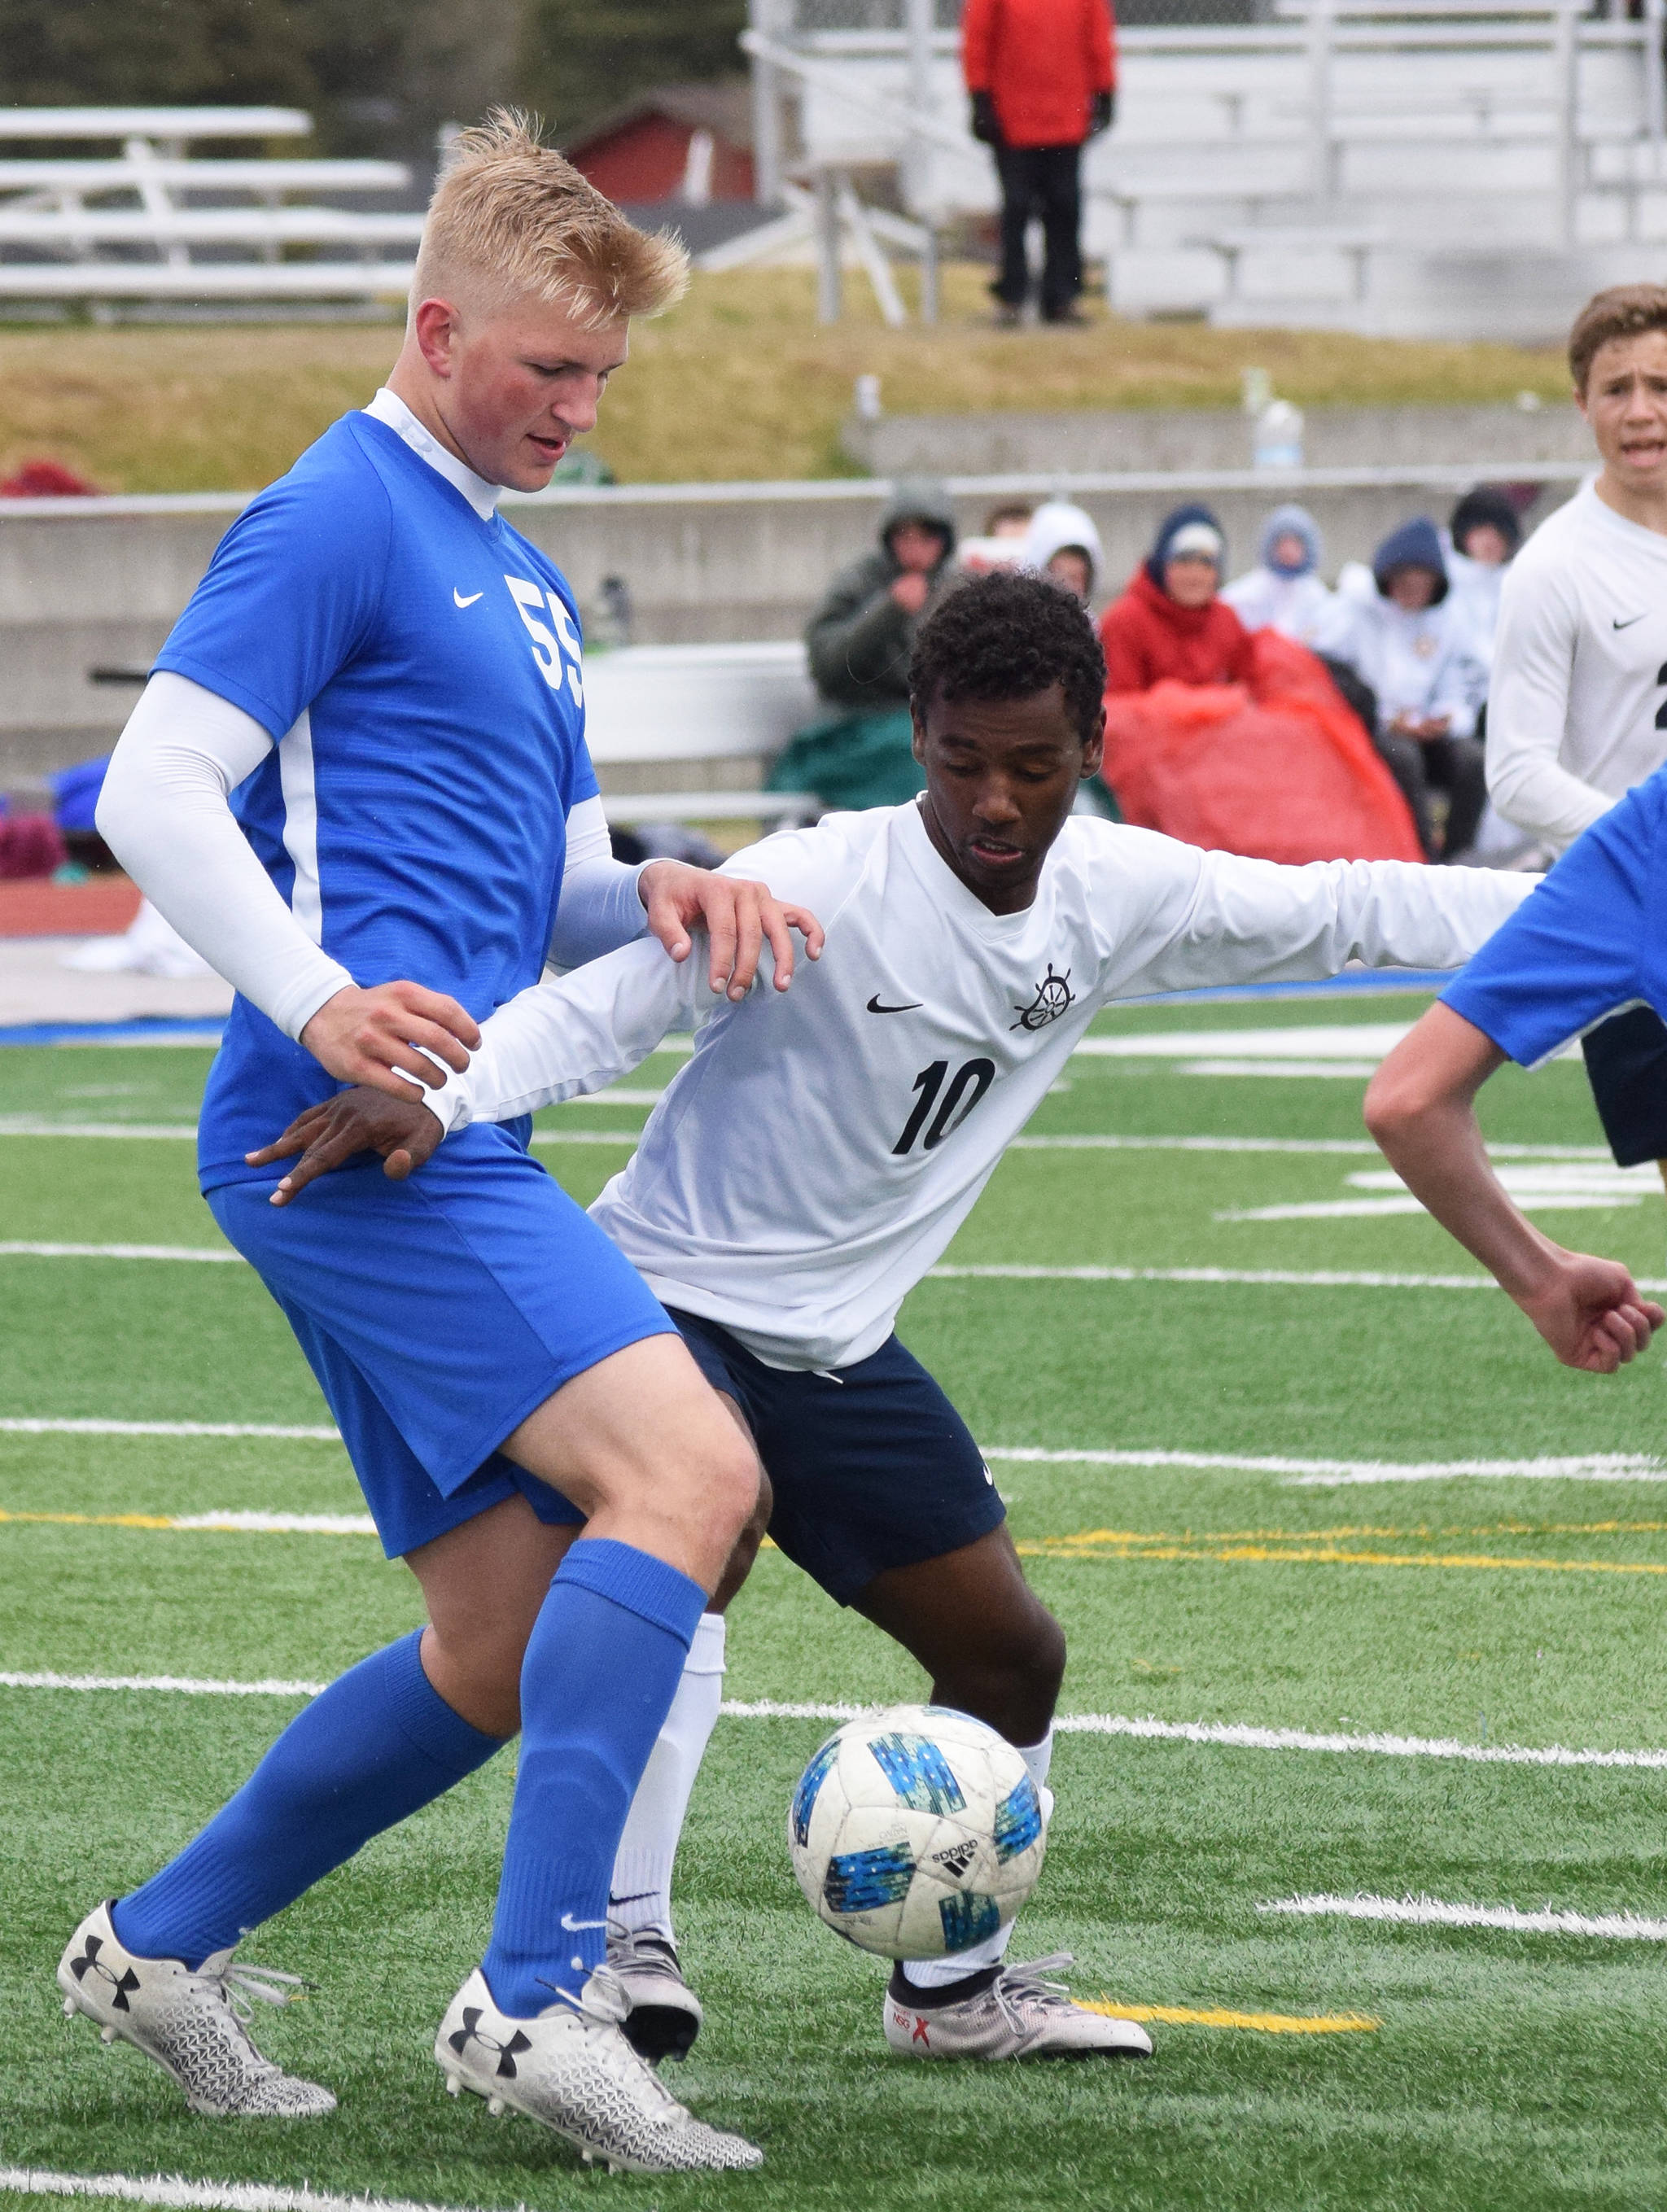 Soldotna’s Hudson Metcalf (left) and Homer’s Eyoab Knapp battle for the ball Saturday, May 11, 2019, in a Peninsula Conference game in Soldotna, Alaska. (Photo by Joey Klecka/Peninsula Clarion)